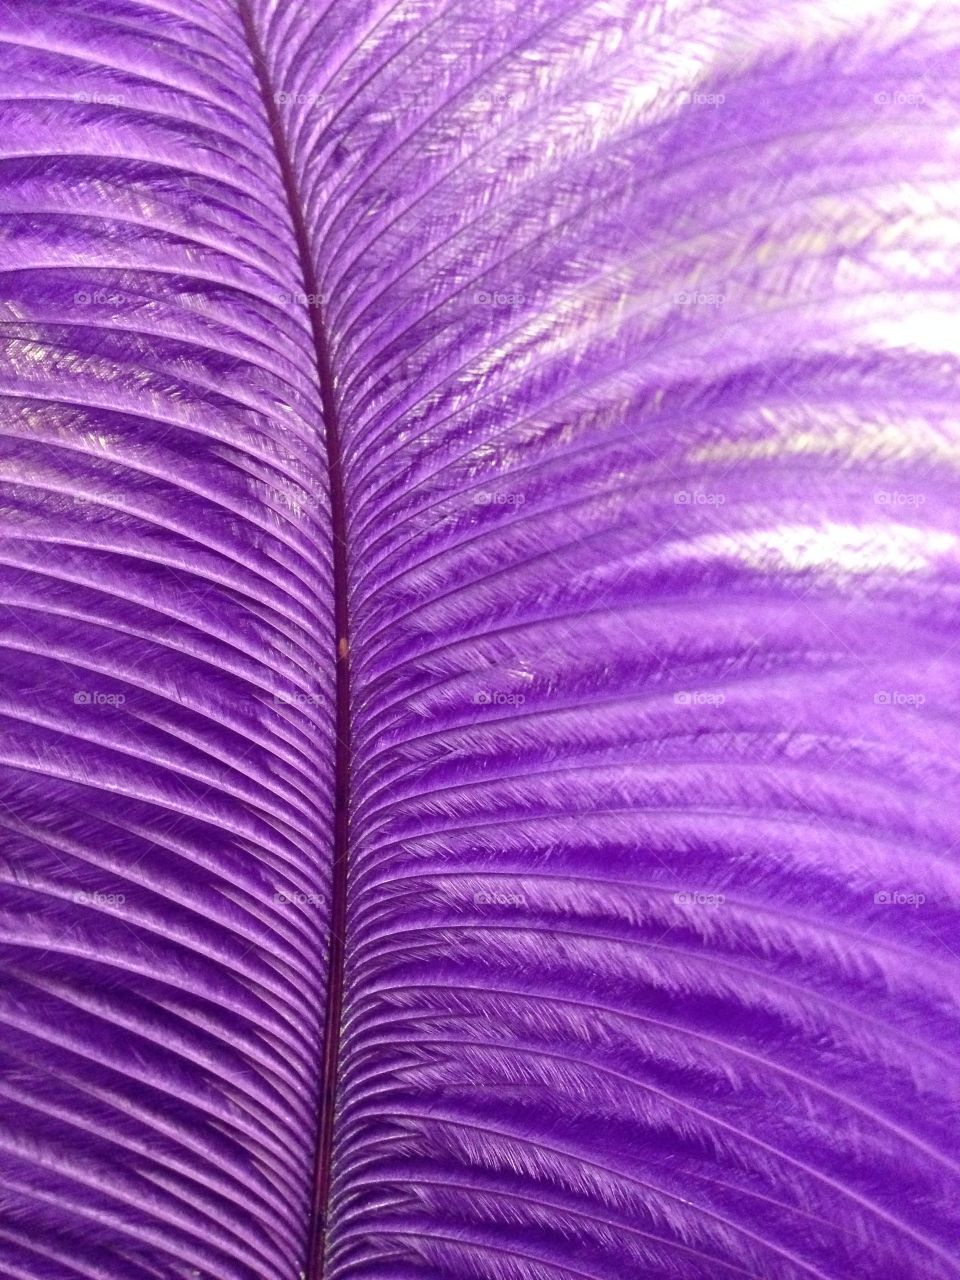 Extreme close-up purple feathers